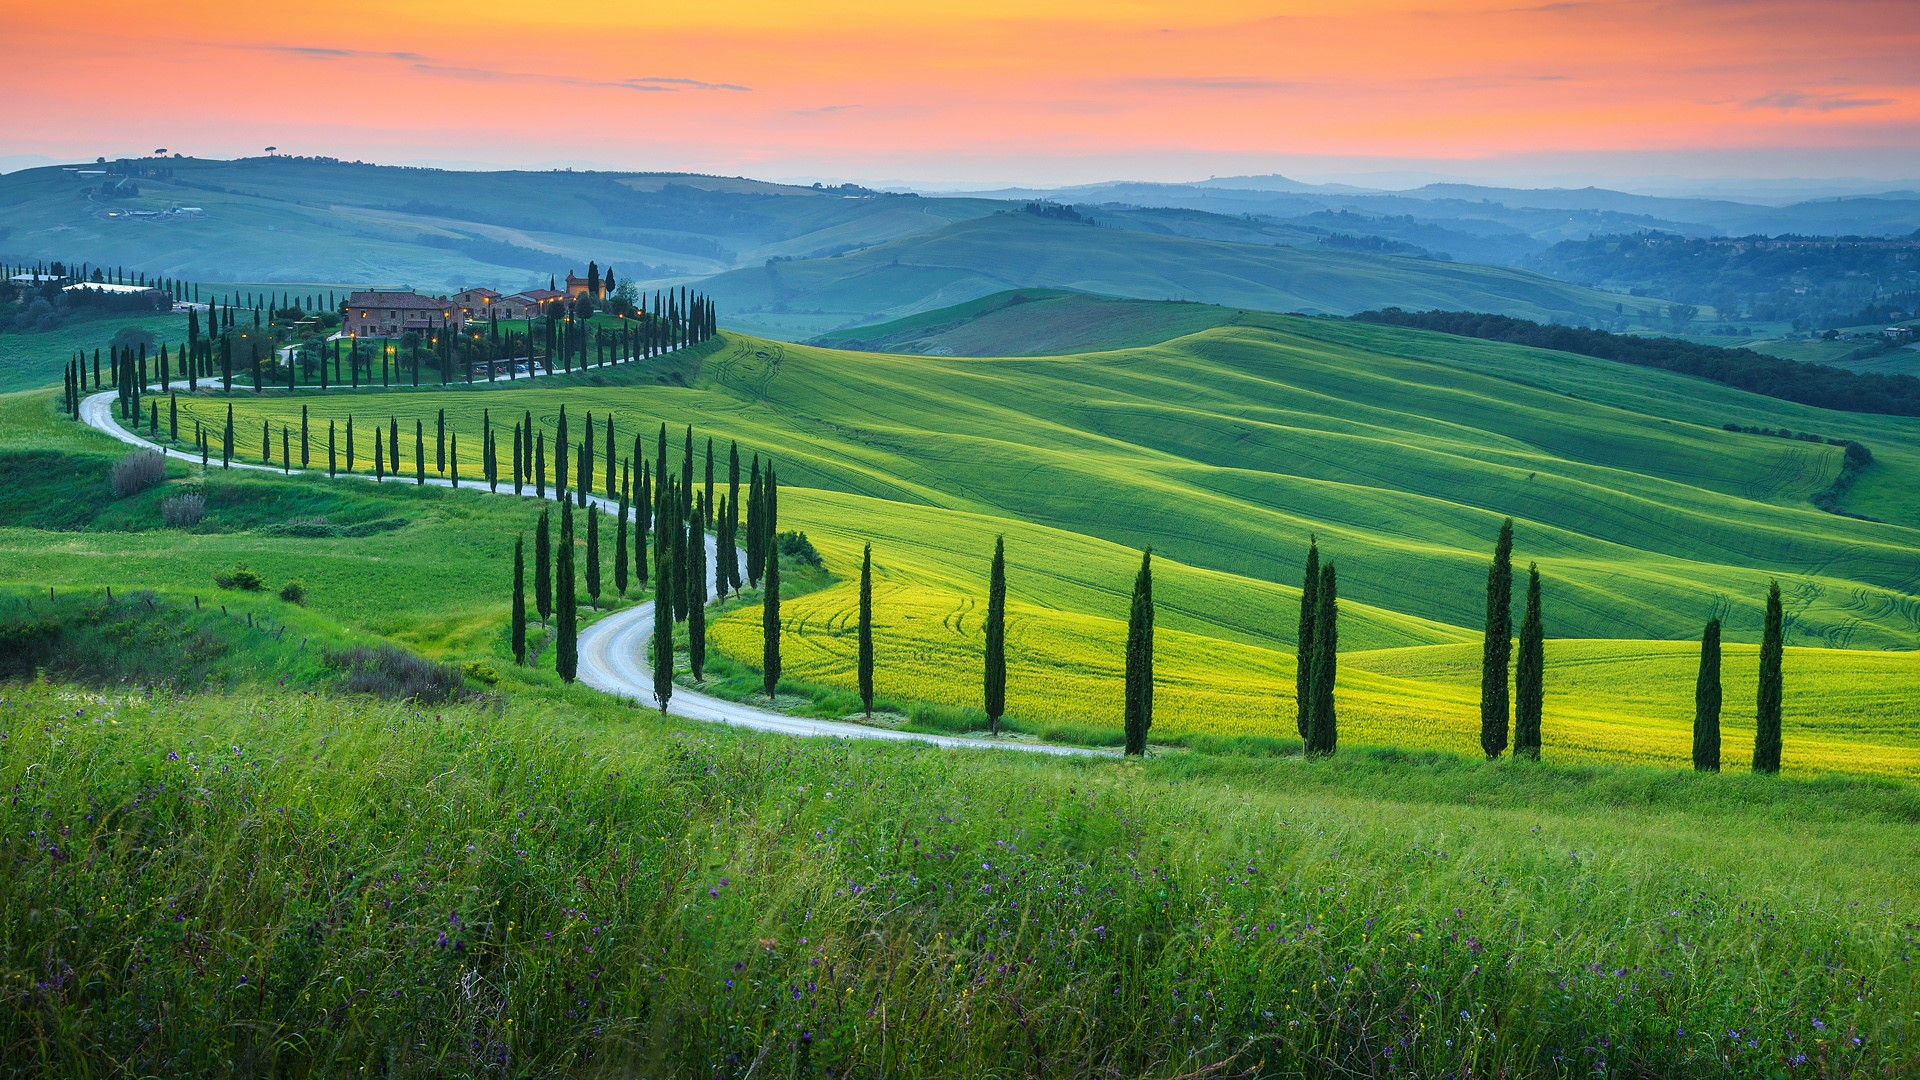 1920x1080 Famous Tuscany landscape with curved road and cypress, Crete Senesi at sunset, Italy | Windows 10 Spotlight Images